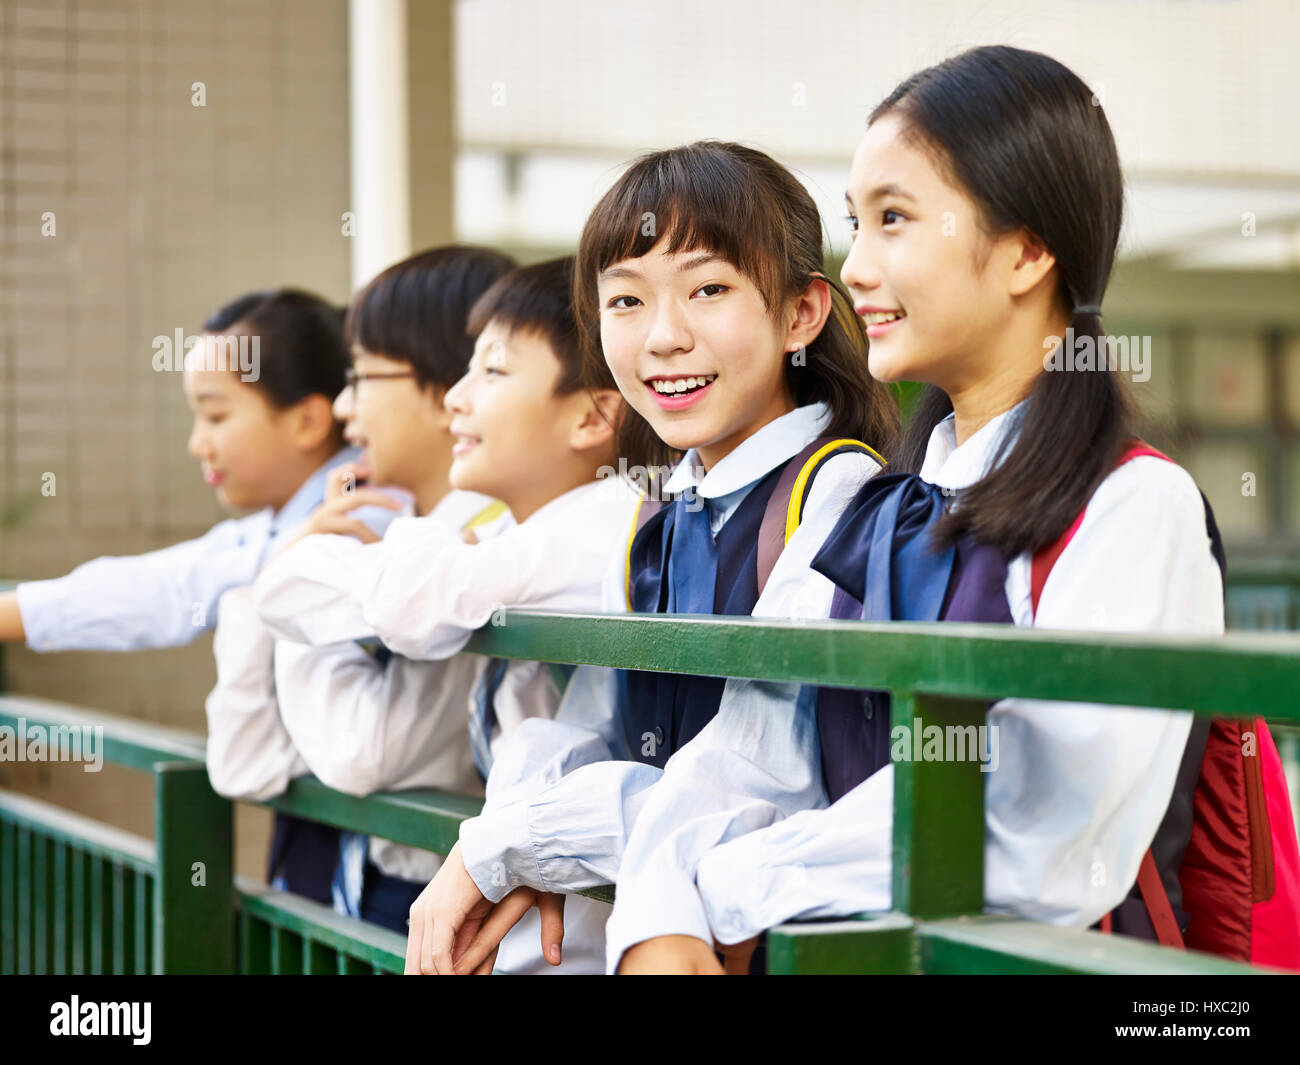 asian elementary school girl looking at camera smiling confidently. Stock Photo